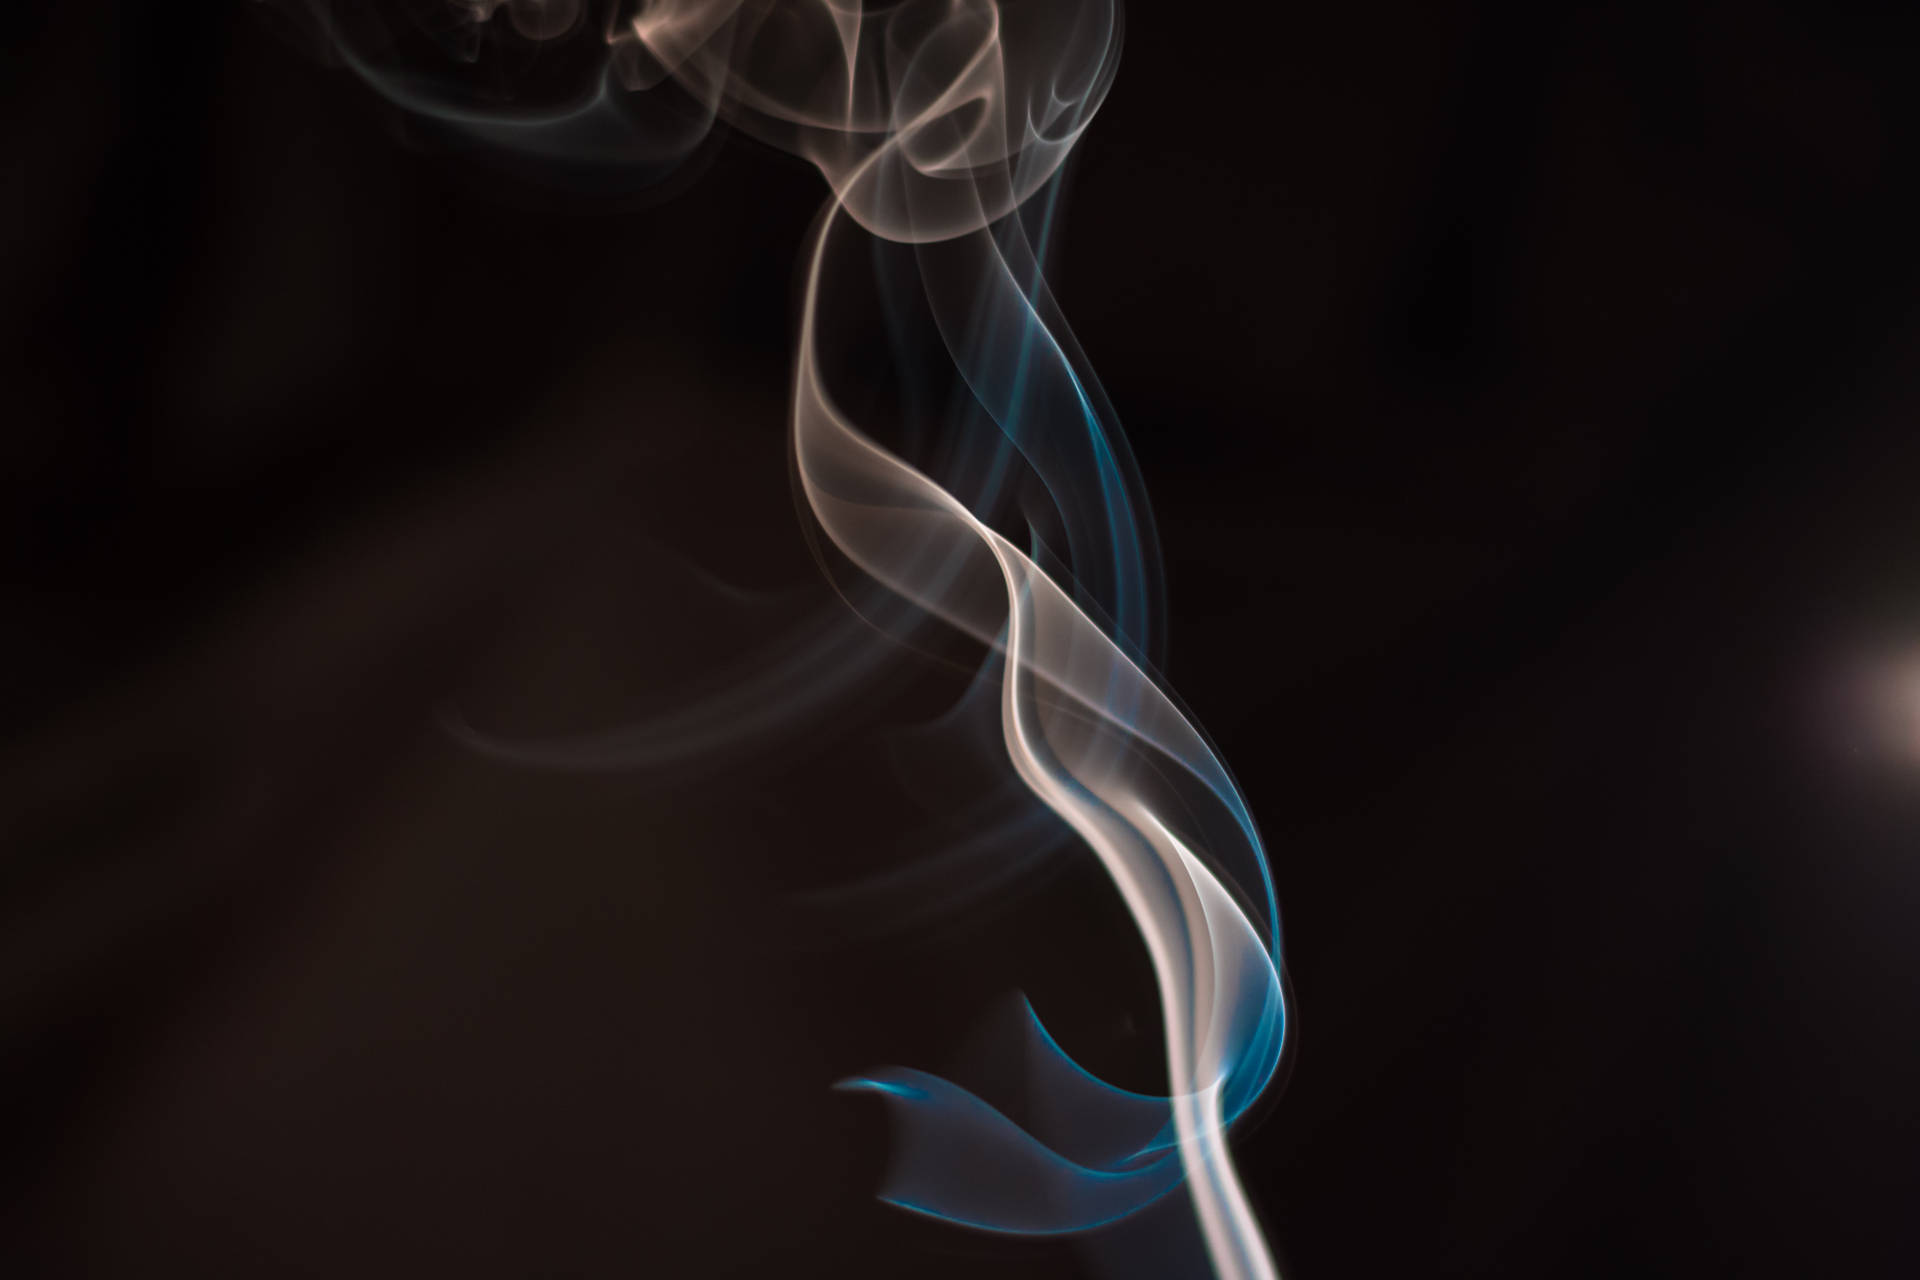 A Lighter Igniting A Cigarette Background